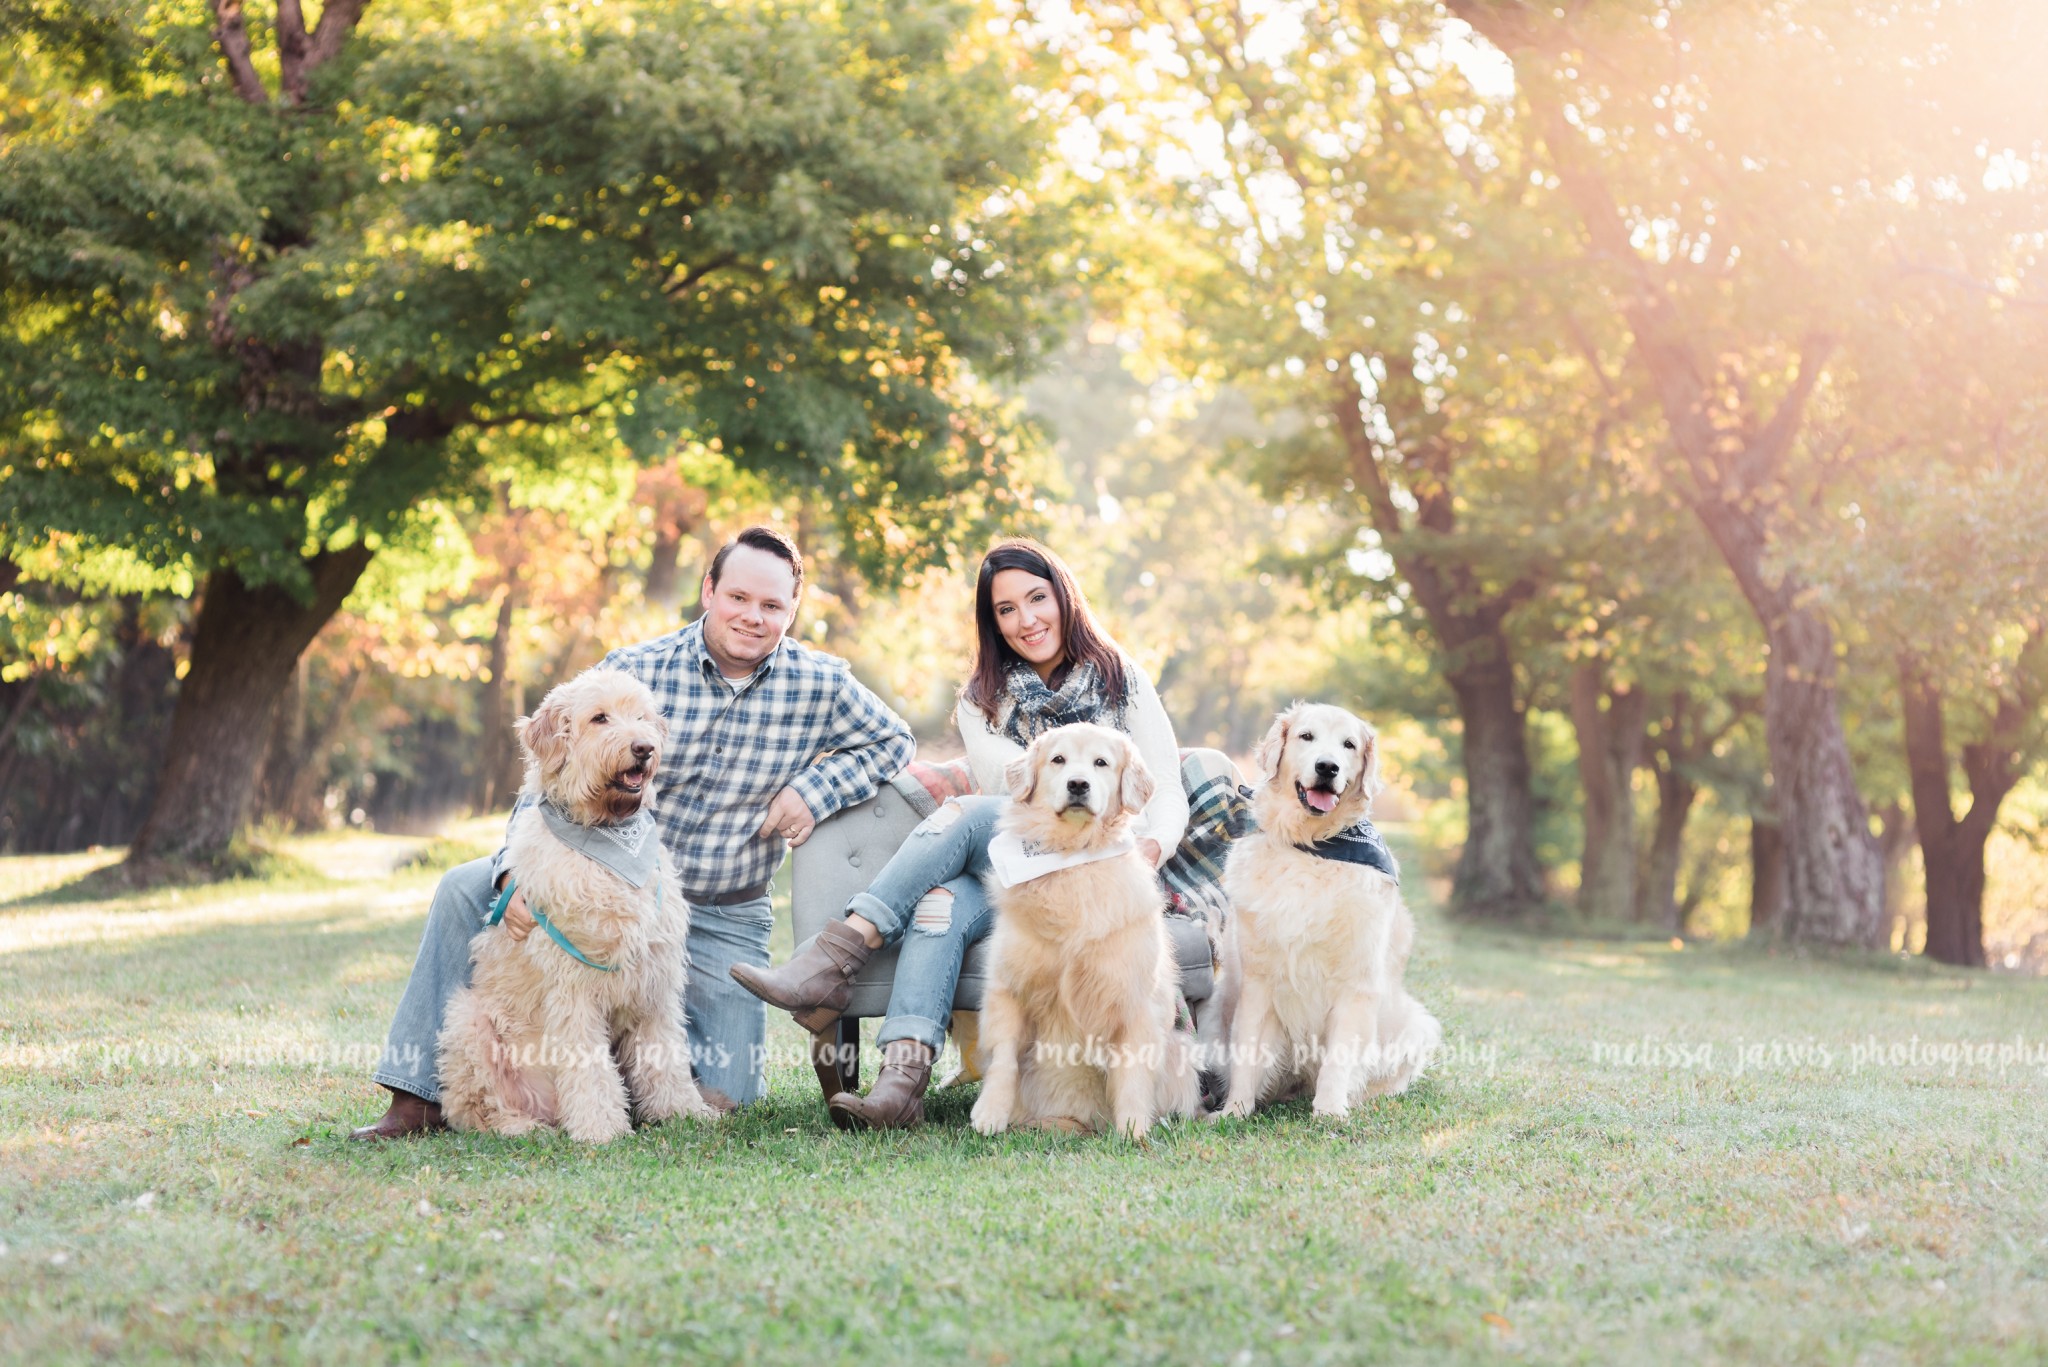 The “F’ Family- Family & Dog Photography Cranberry Township |Fall Mini Sessions Pittsburgh|